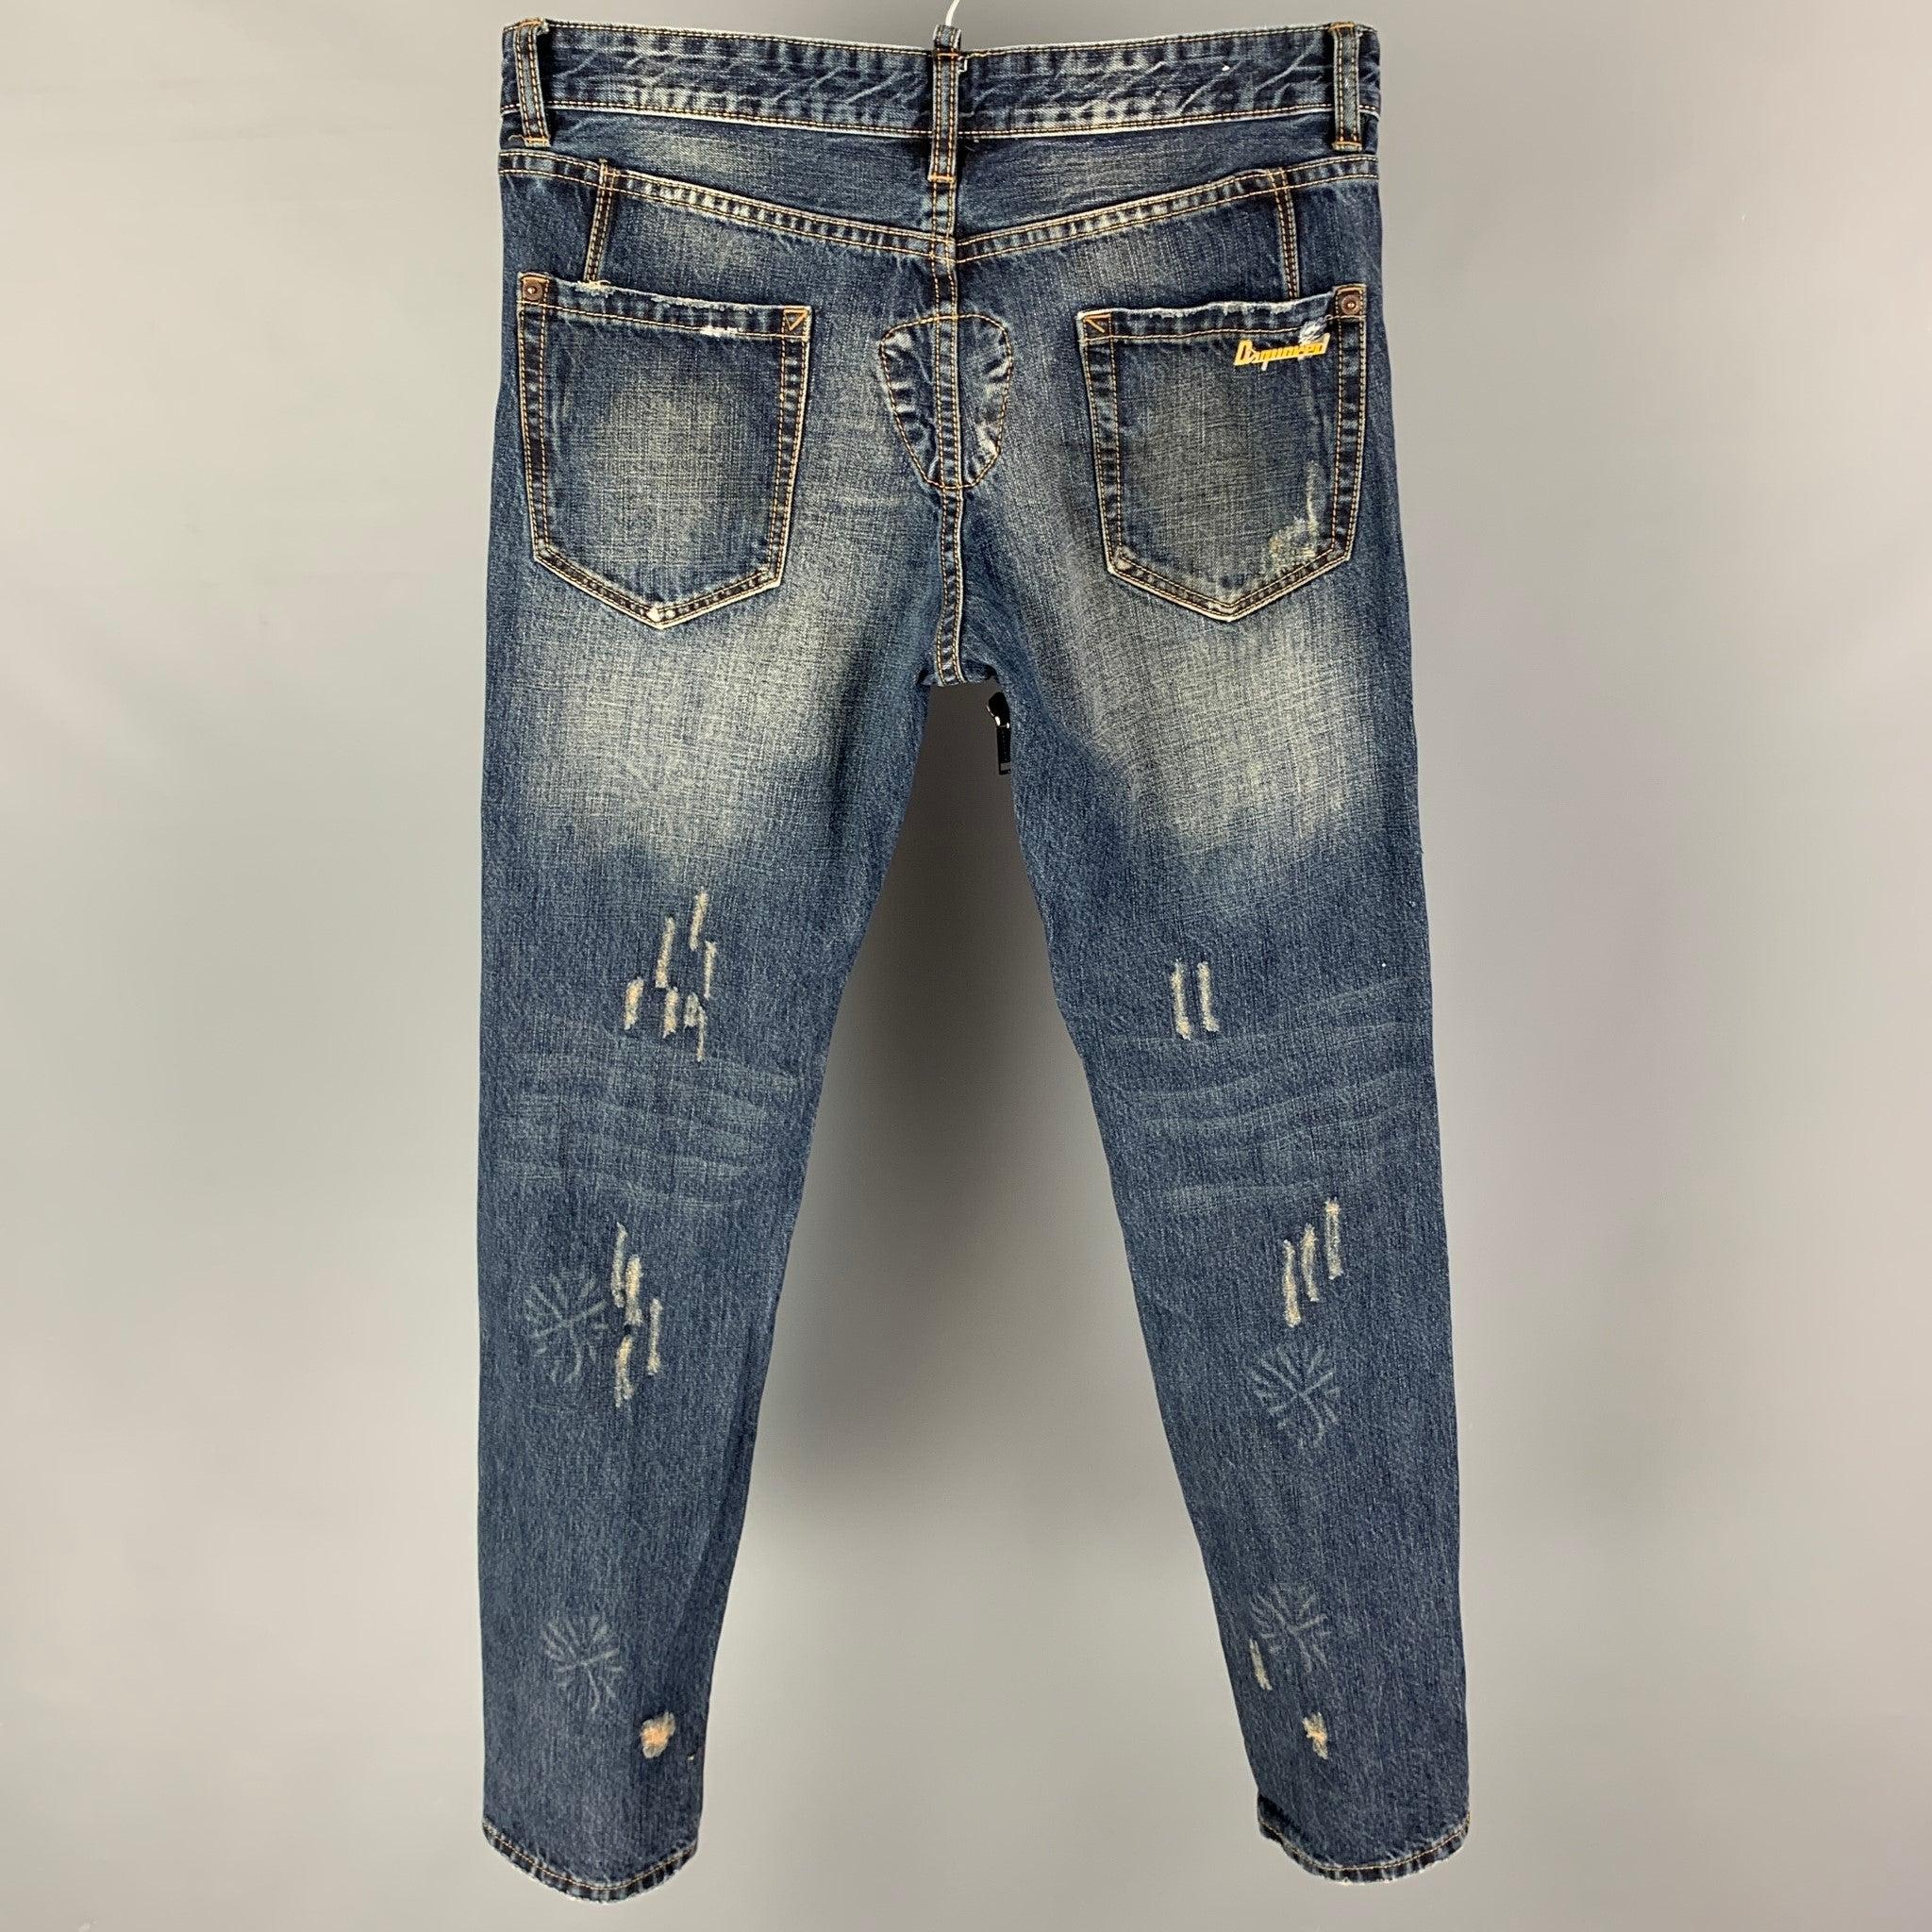 DSQUARED2 Size 32 Blue Black Distressed Cotton Skinny Slim Jeans In Good Condition For Sale In San Francisco, CA